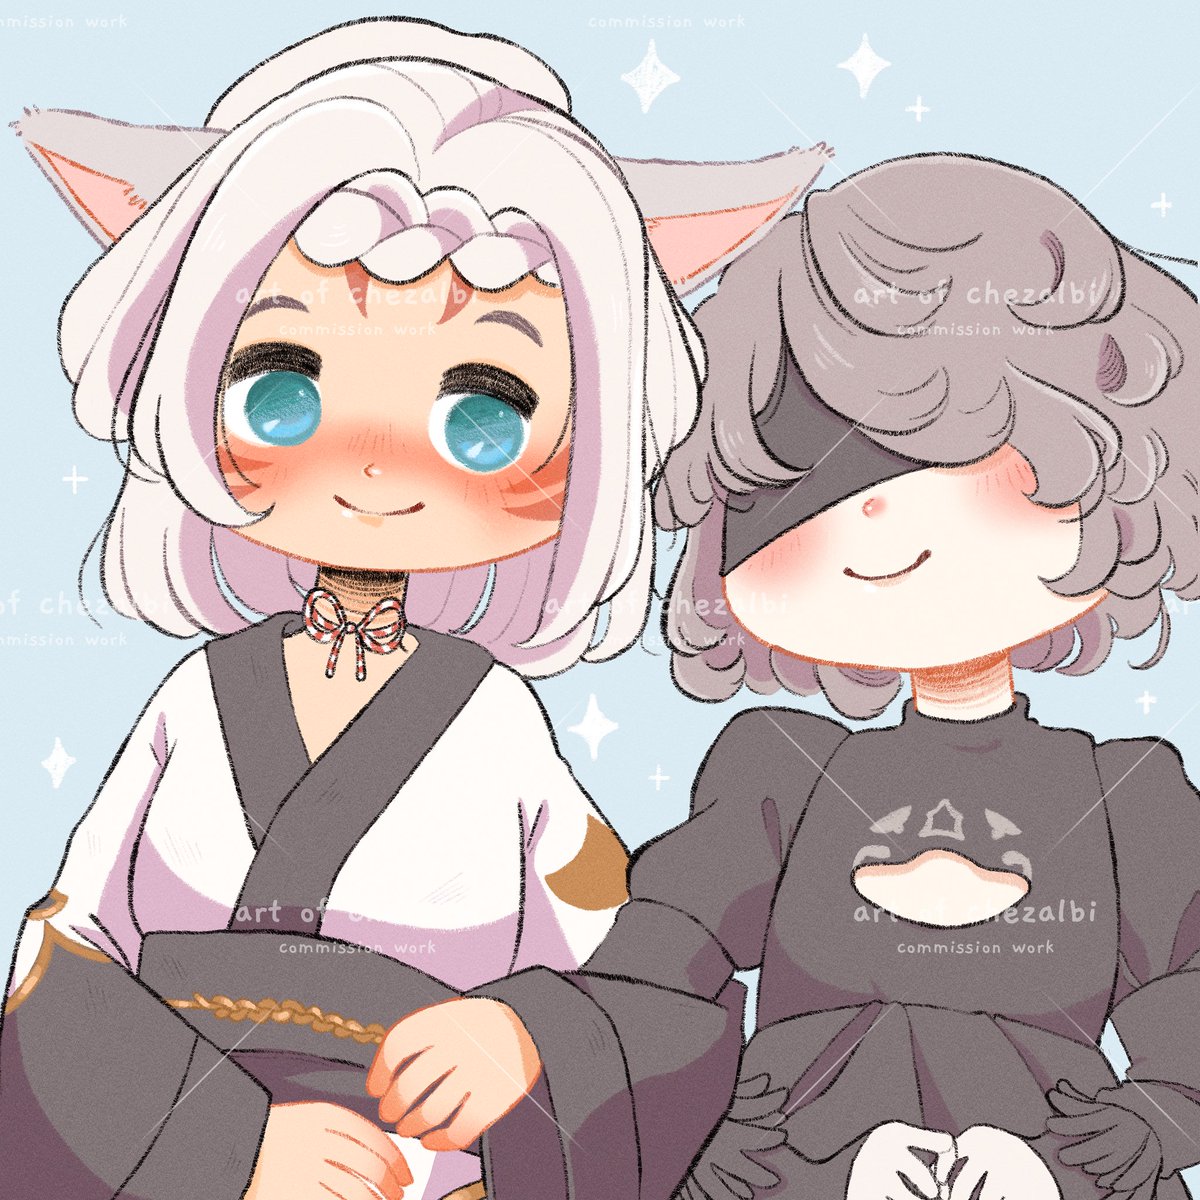 「FFXIV cmmissions I've done lately! 」|chezalbiのイラスト